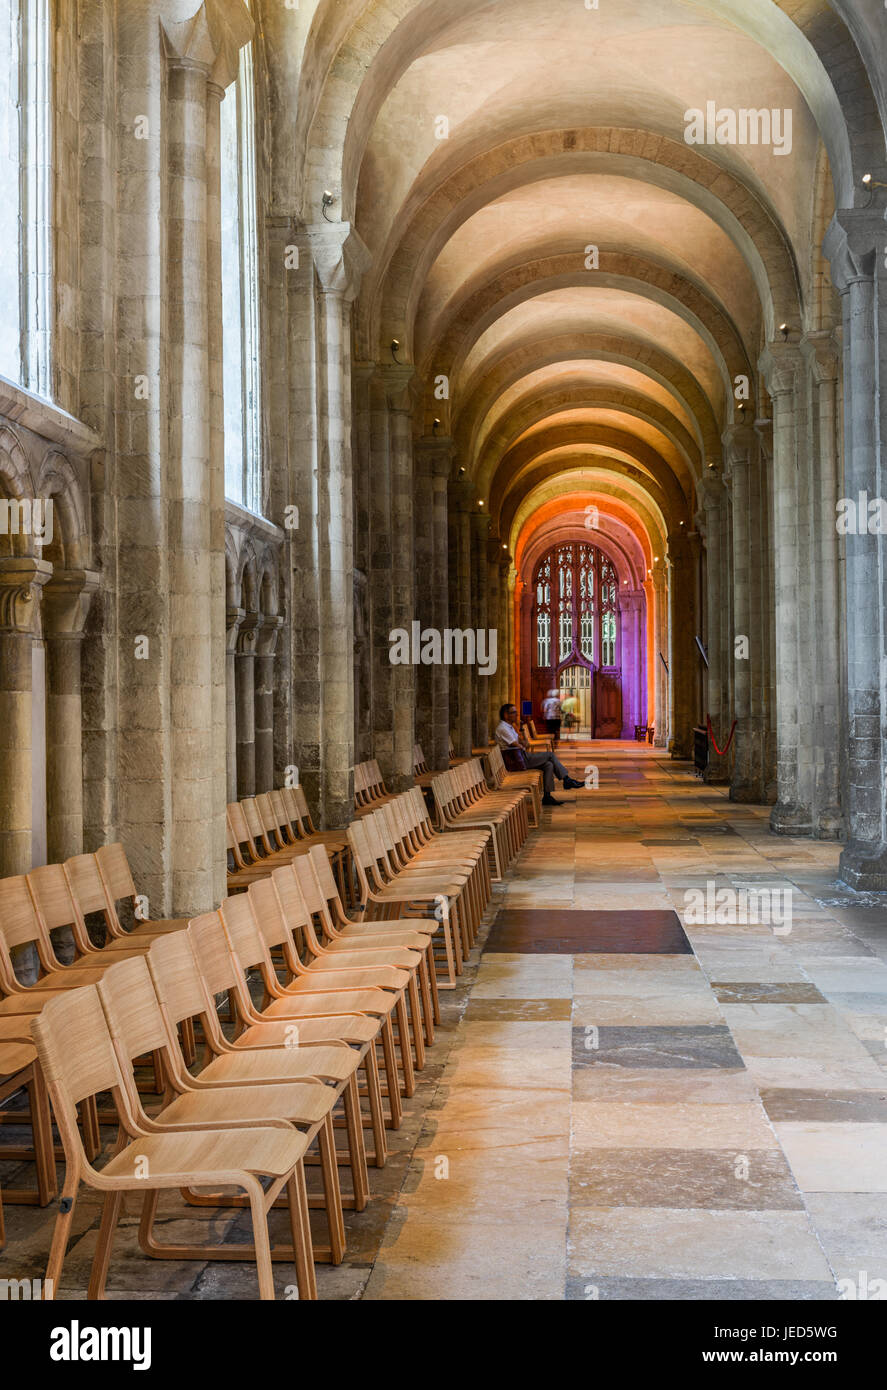 North aisle at the norman built (eleventh century AD) christian cathedral church in Norwich, Norfolk, England. Stock Photo